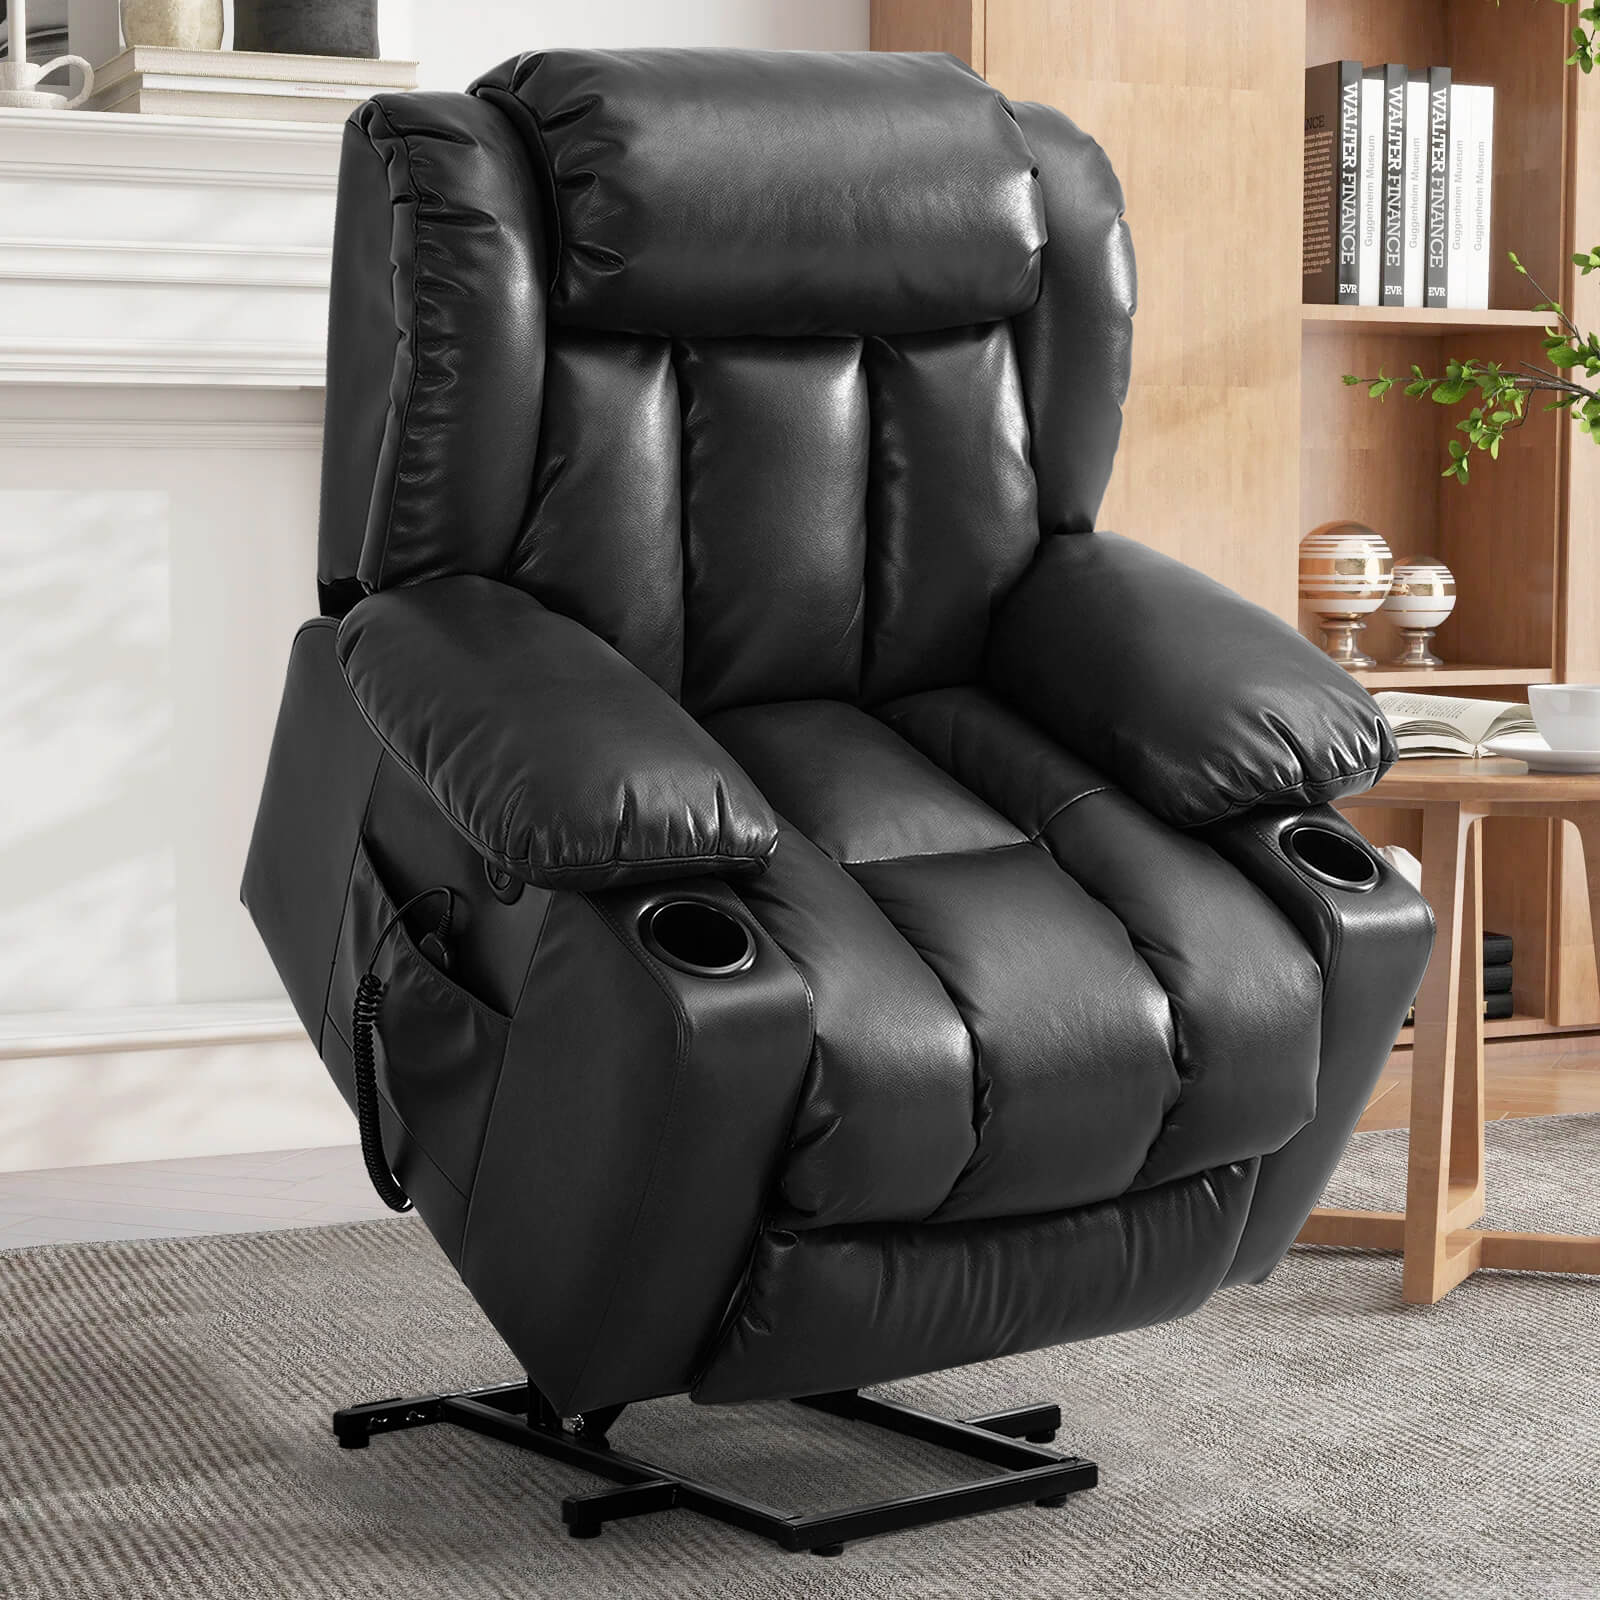 Soulout Luxury Lift Chair Recliner with Heat and Massage Black